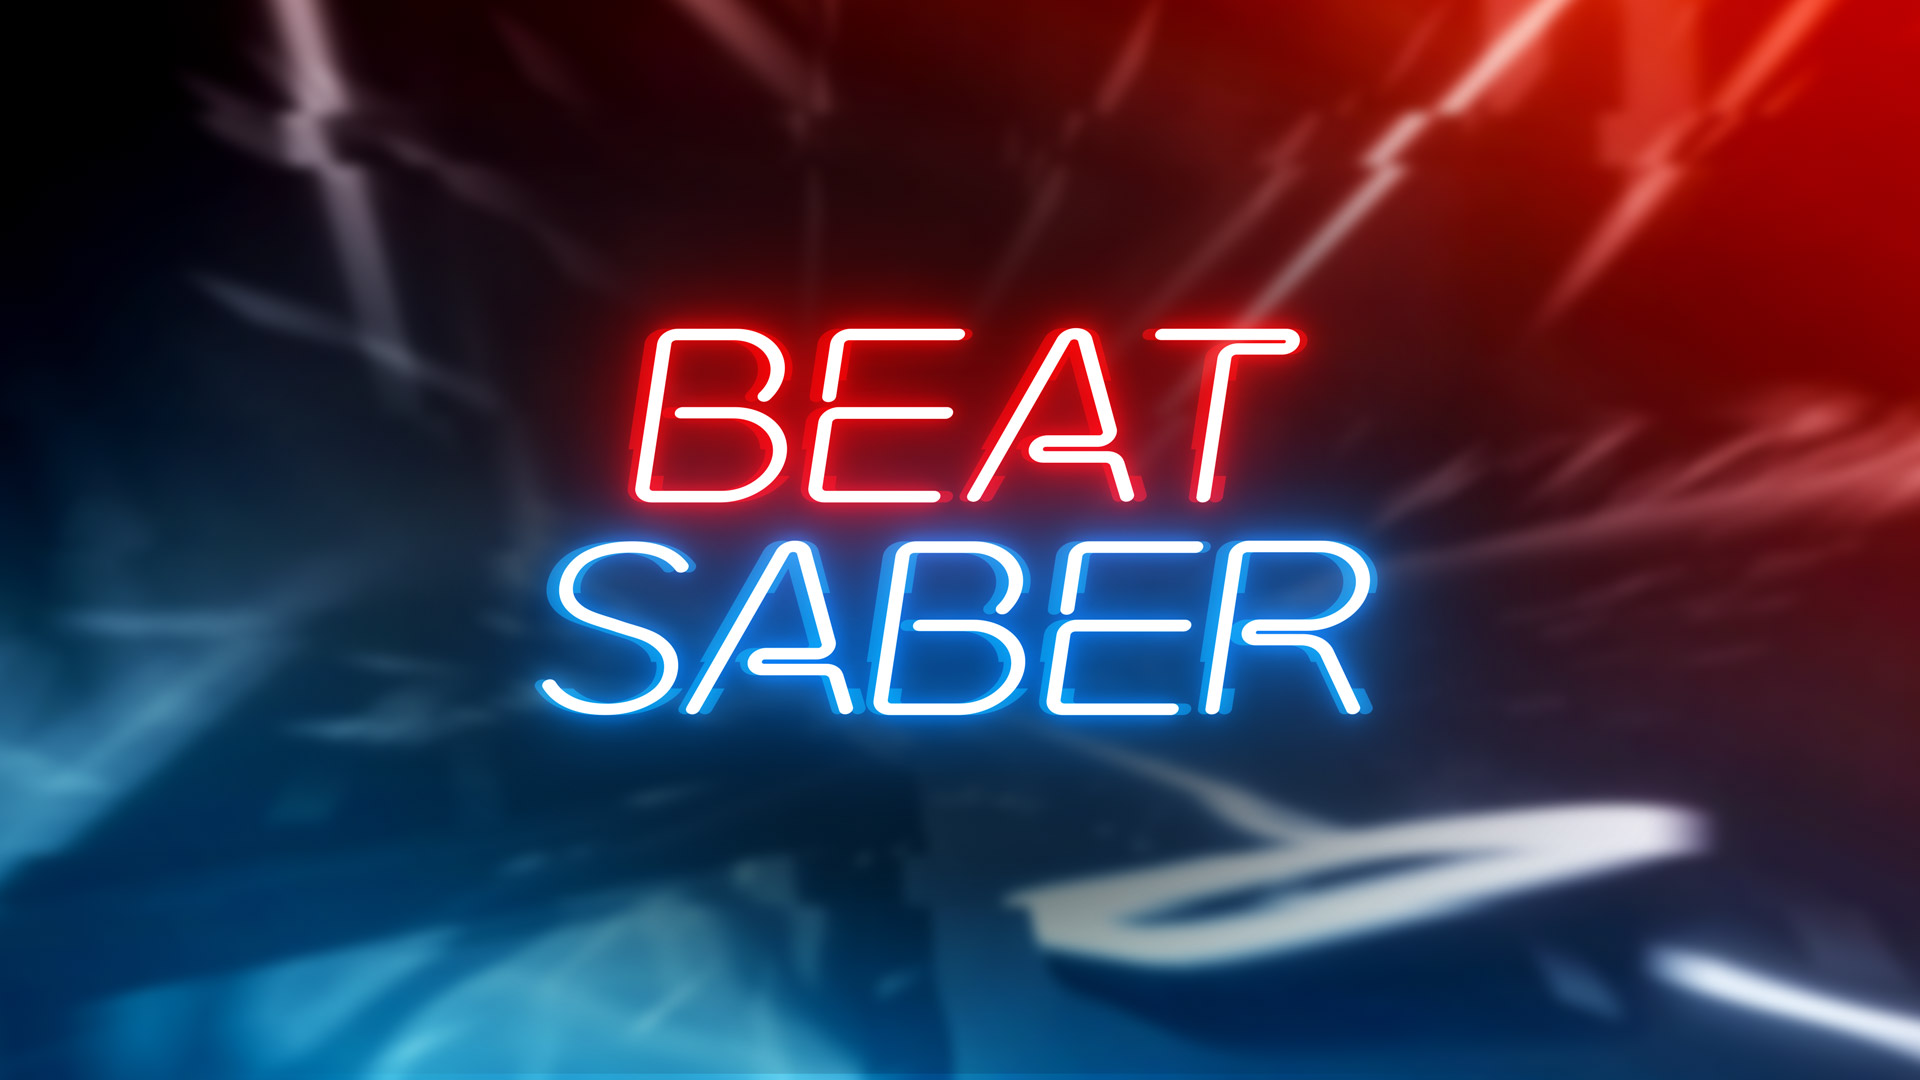 Beat Saber on Twitter Suit up your phone or PC screen with a brand new Beat  Saber x Linkin Park wallpaper Find all resolutions in the tweet below   WallpaperWednesday httpstco2DM3I3nE7g 